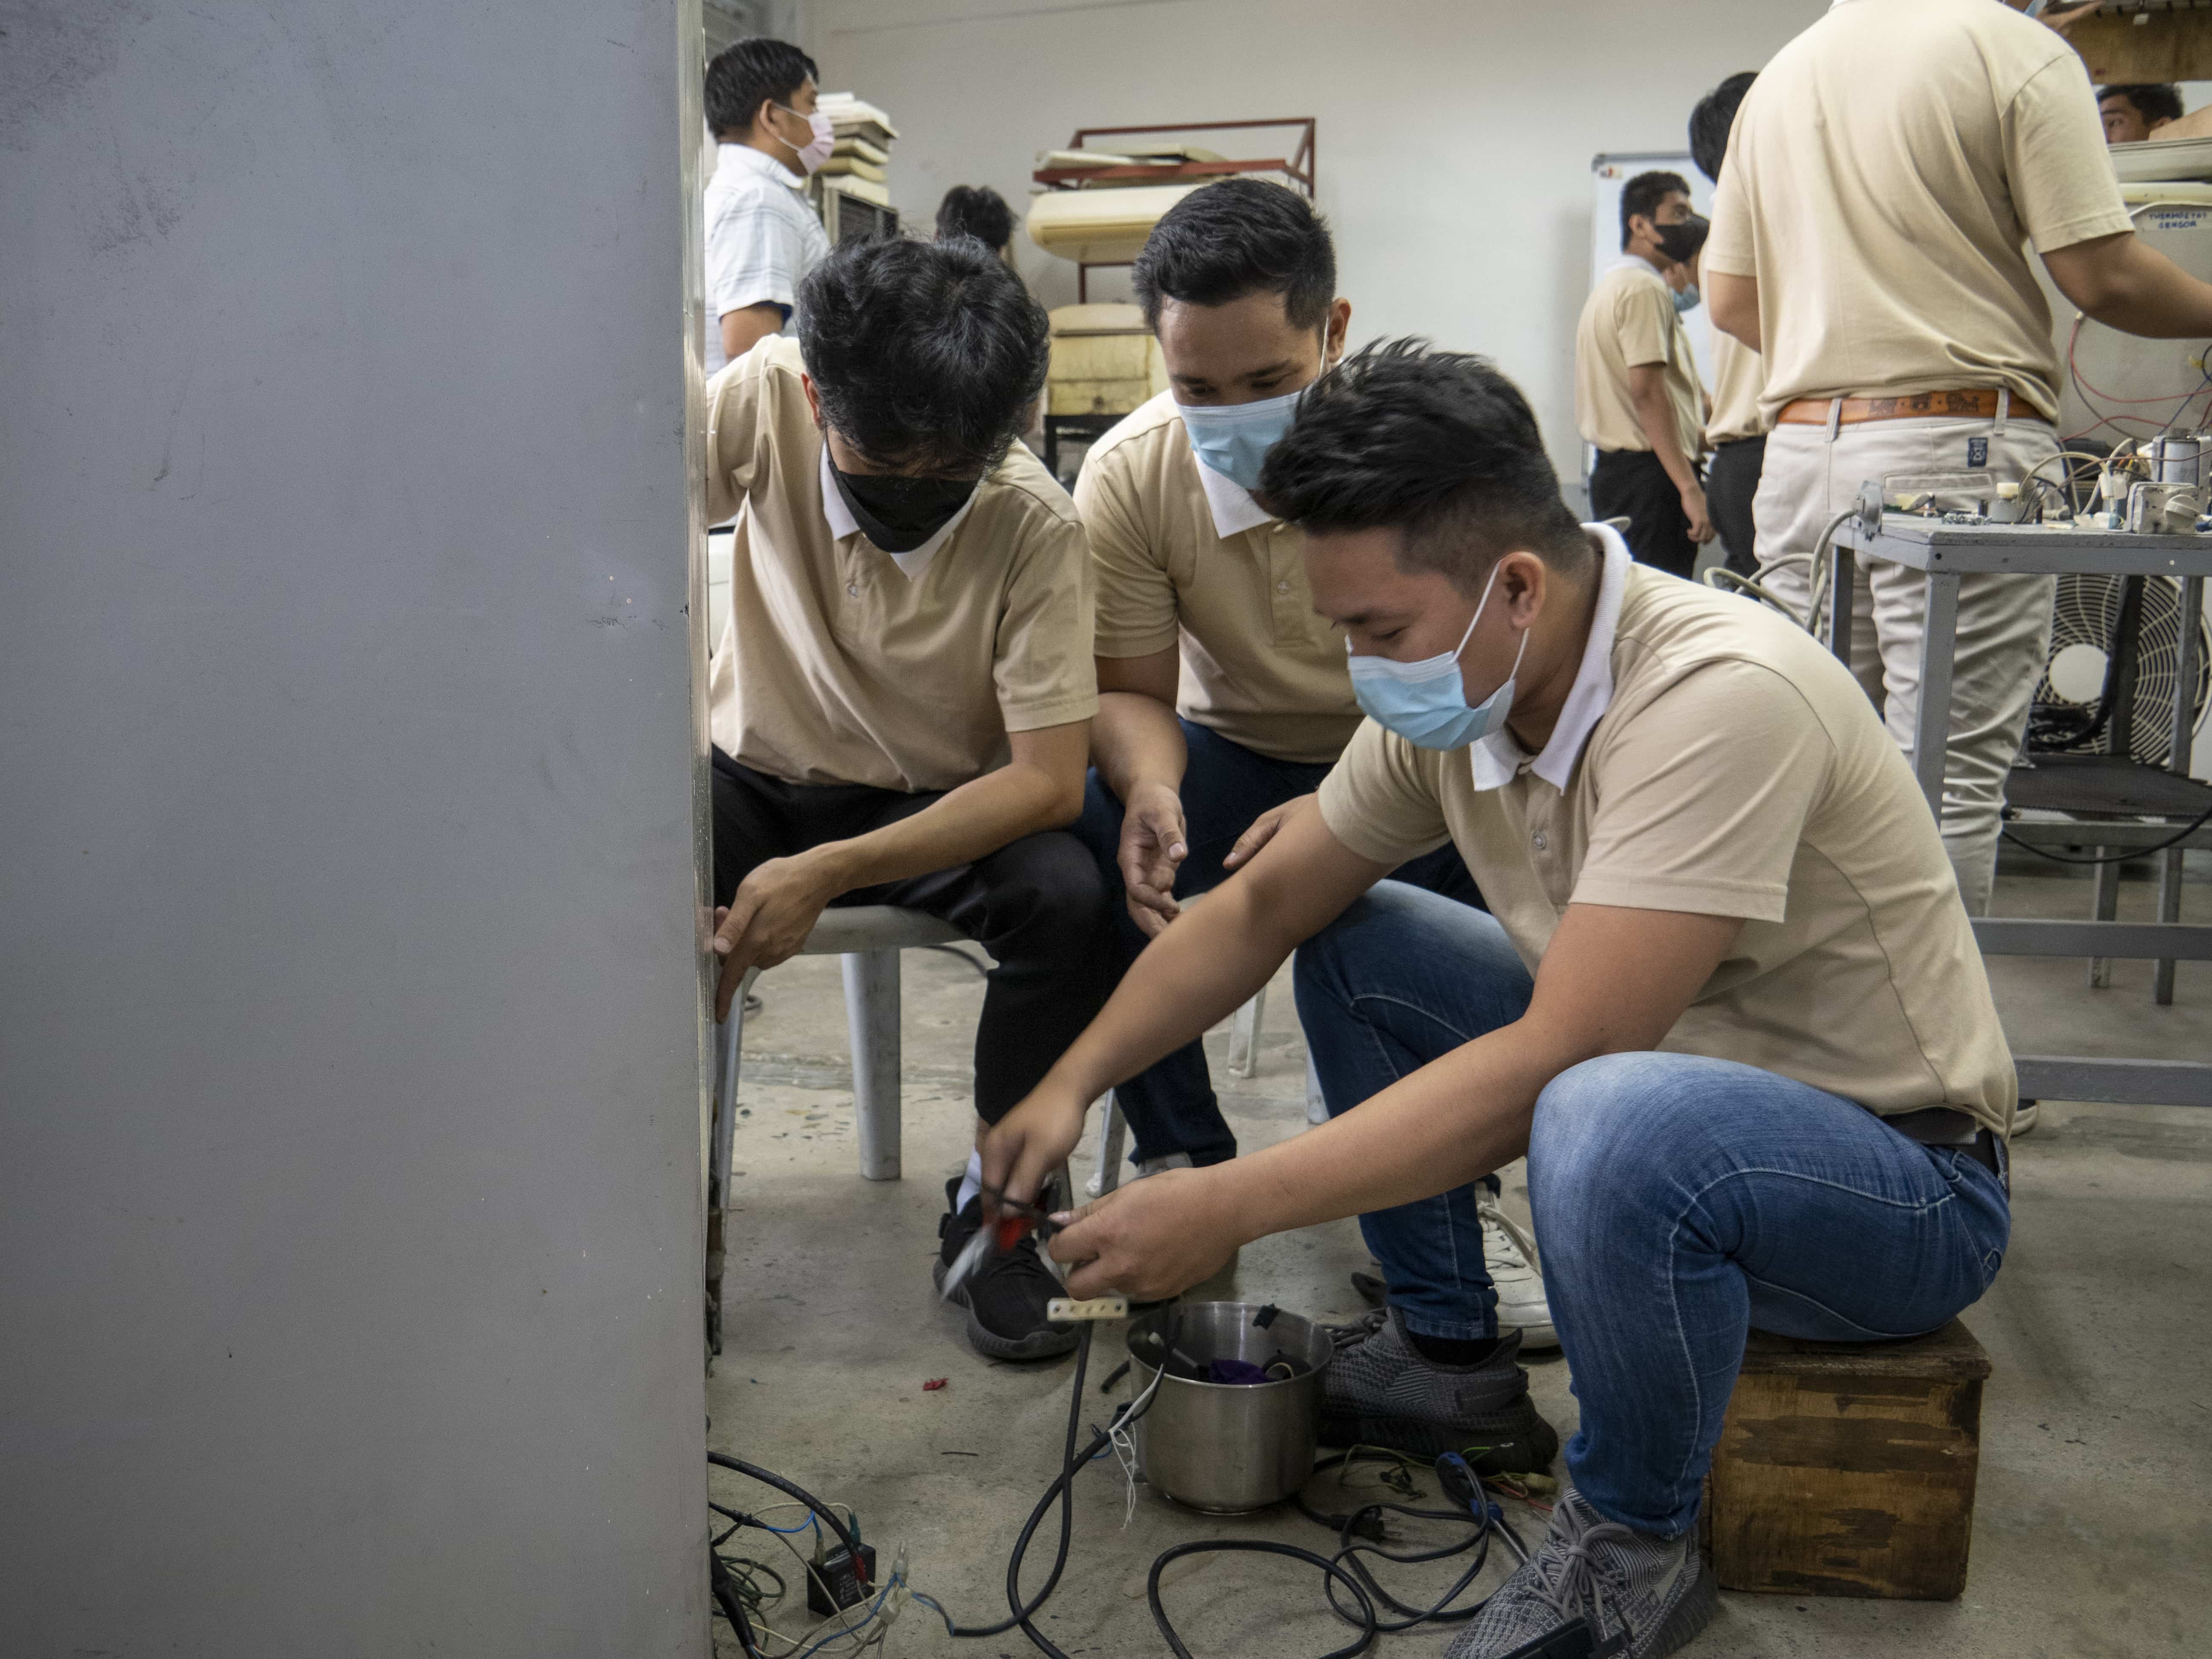 Tzu Chi’s Refrigerator and Air-conditioning Course combines lectures with hands-on training. 【Photo by Matt Serrano】